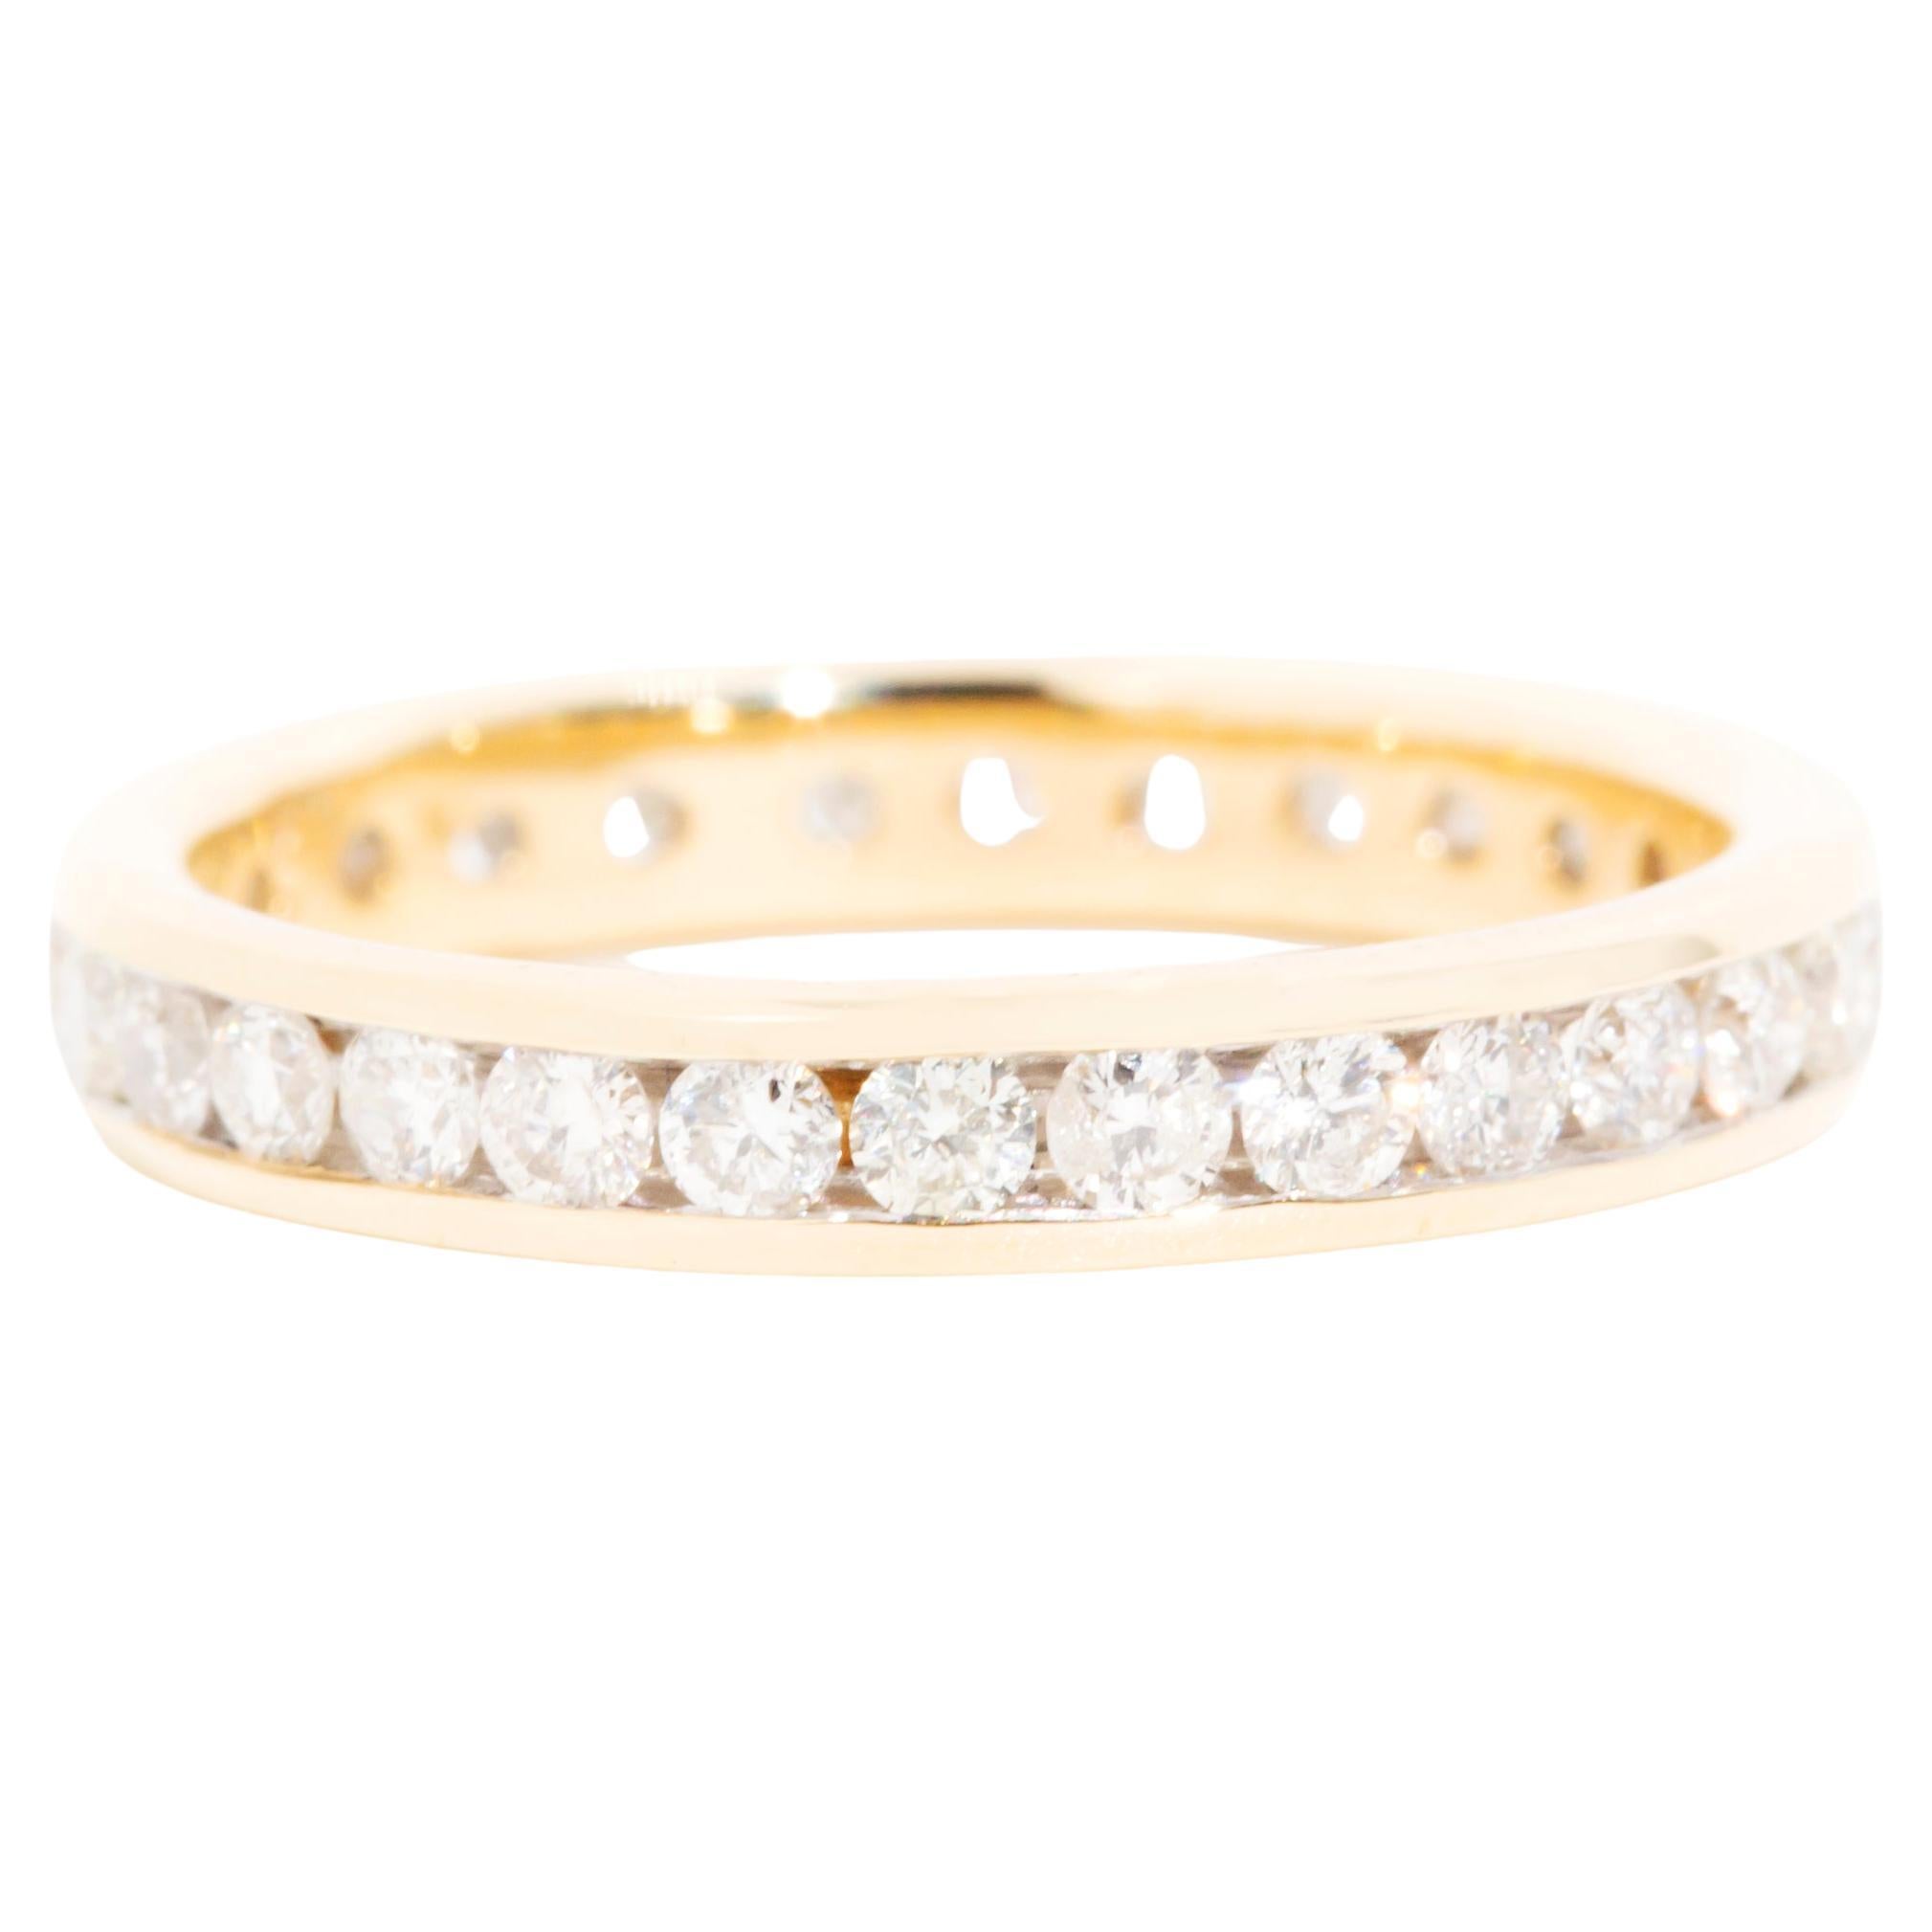 Infinity Round Diamond Vintage Eternity Band Ring in 9 Carat Yellow Gold